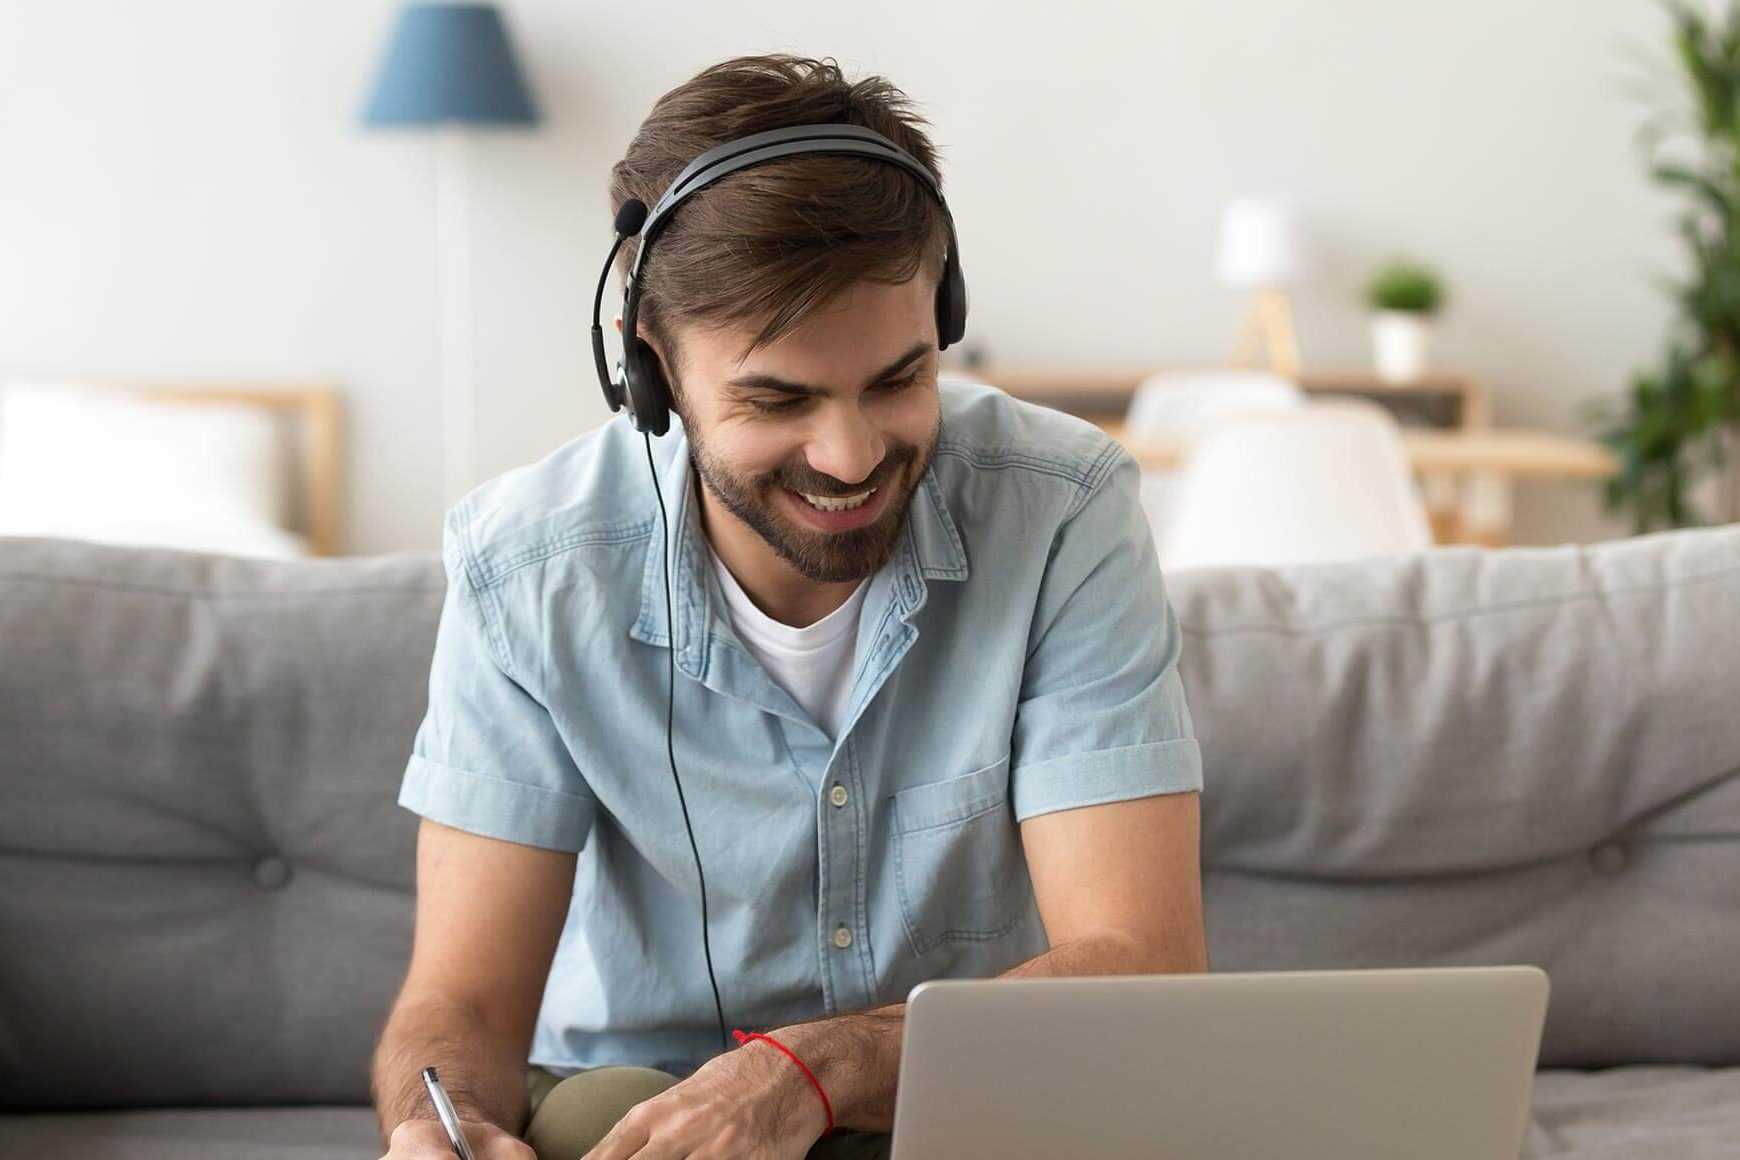 10 Advantages to Employing At-Home Call Center Agents